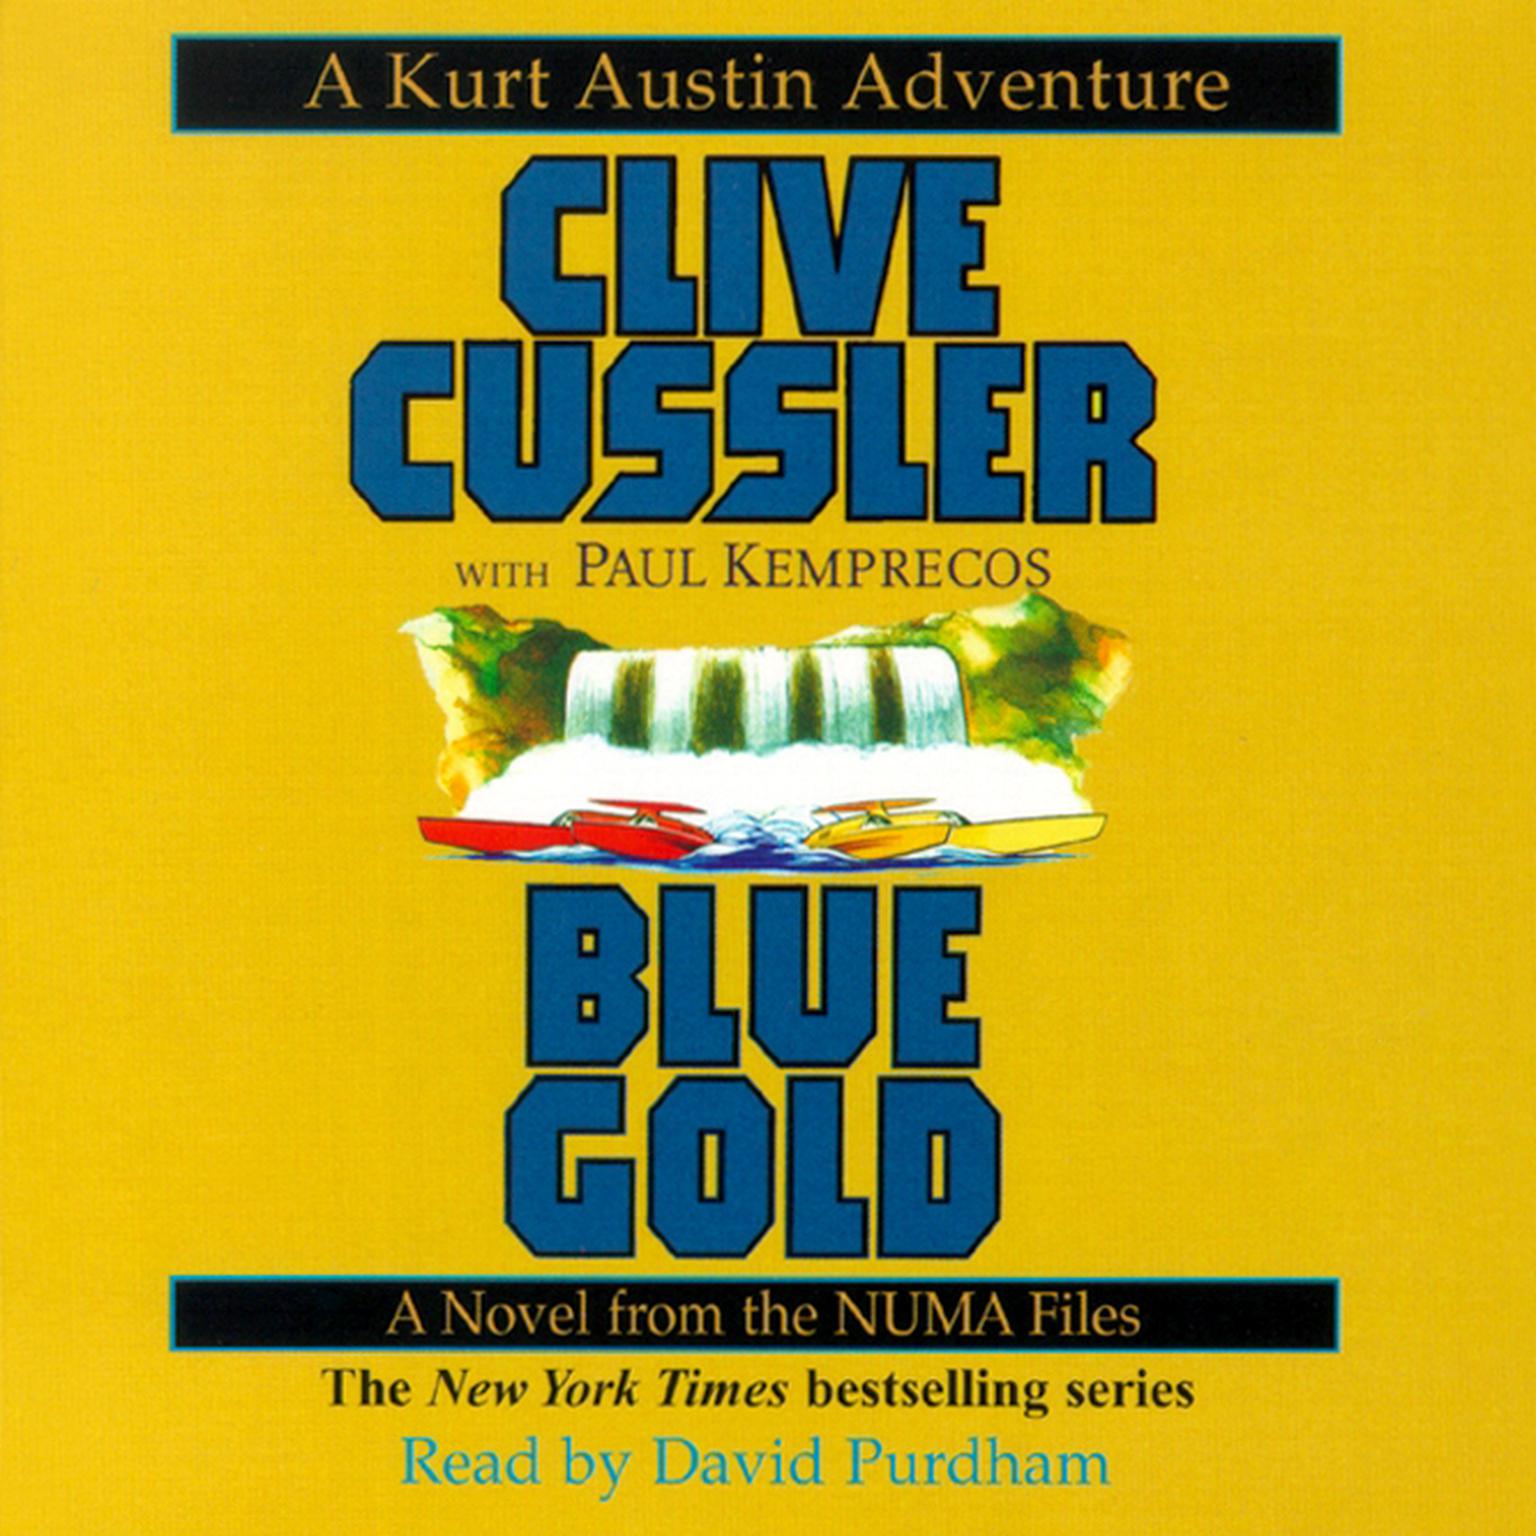 Blue Gold (Abridged): A Novel from the NUMA Files Audiobook, by Clive Cussler